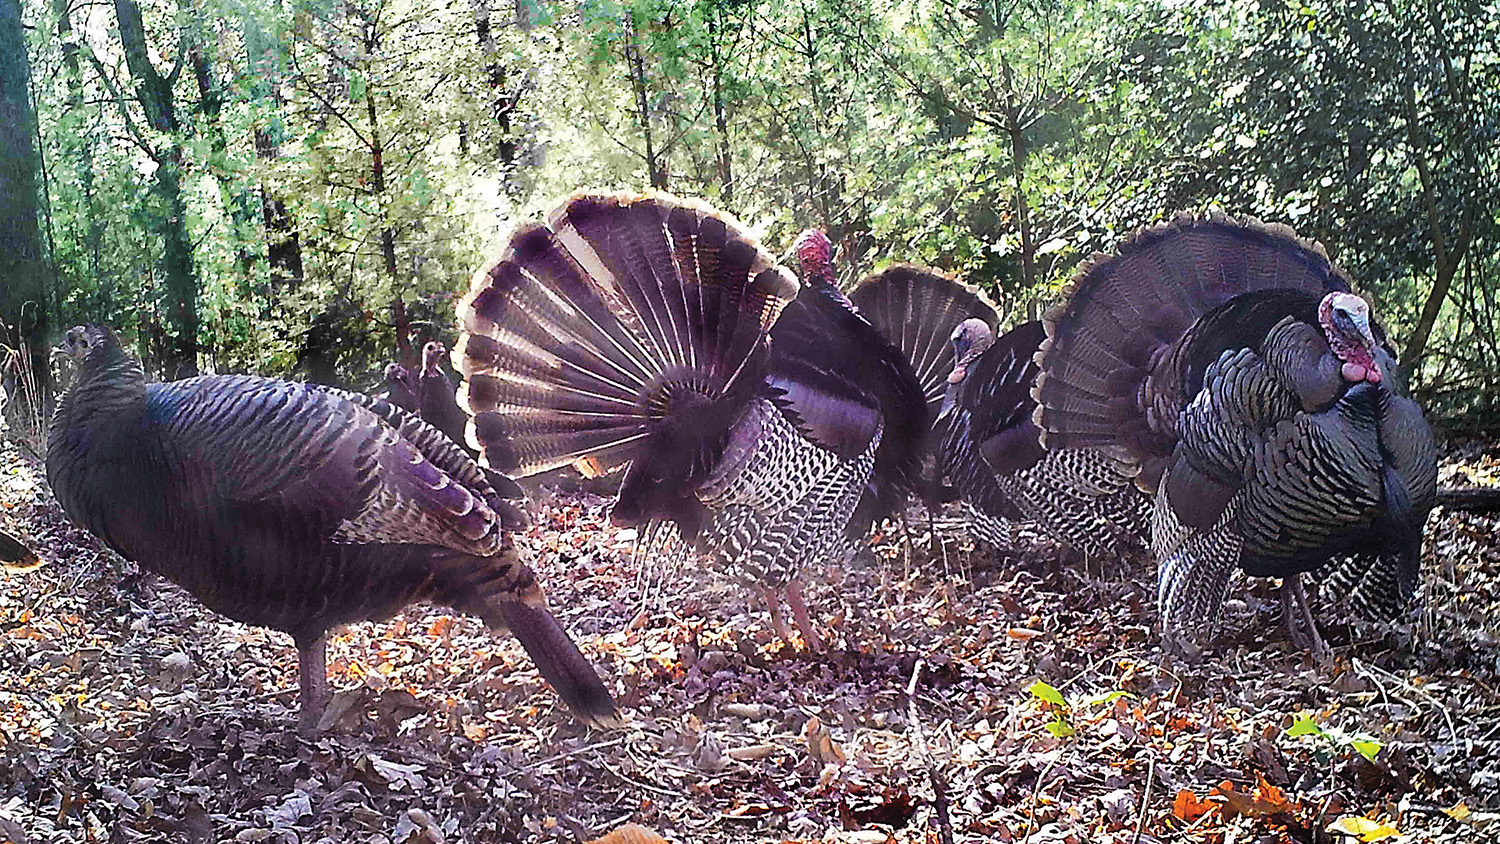 Flow off turkeys stand together - Tracking Turkeys - College of Natural Resources News NC State University